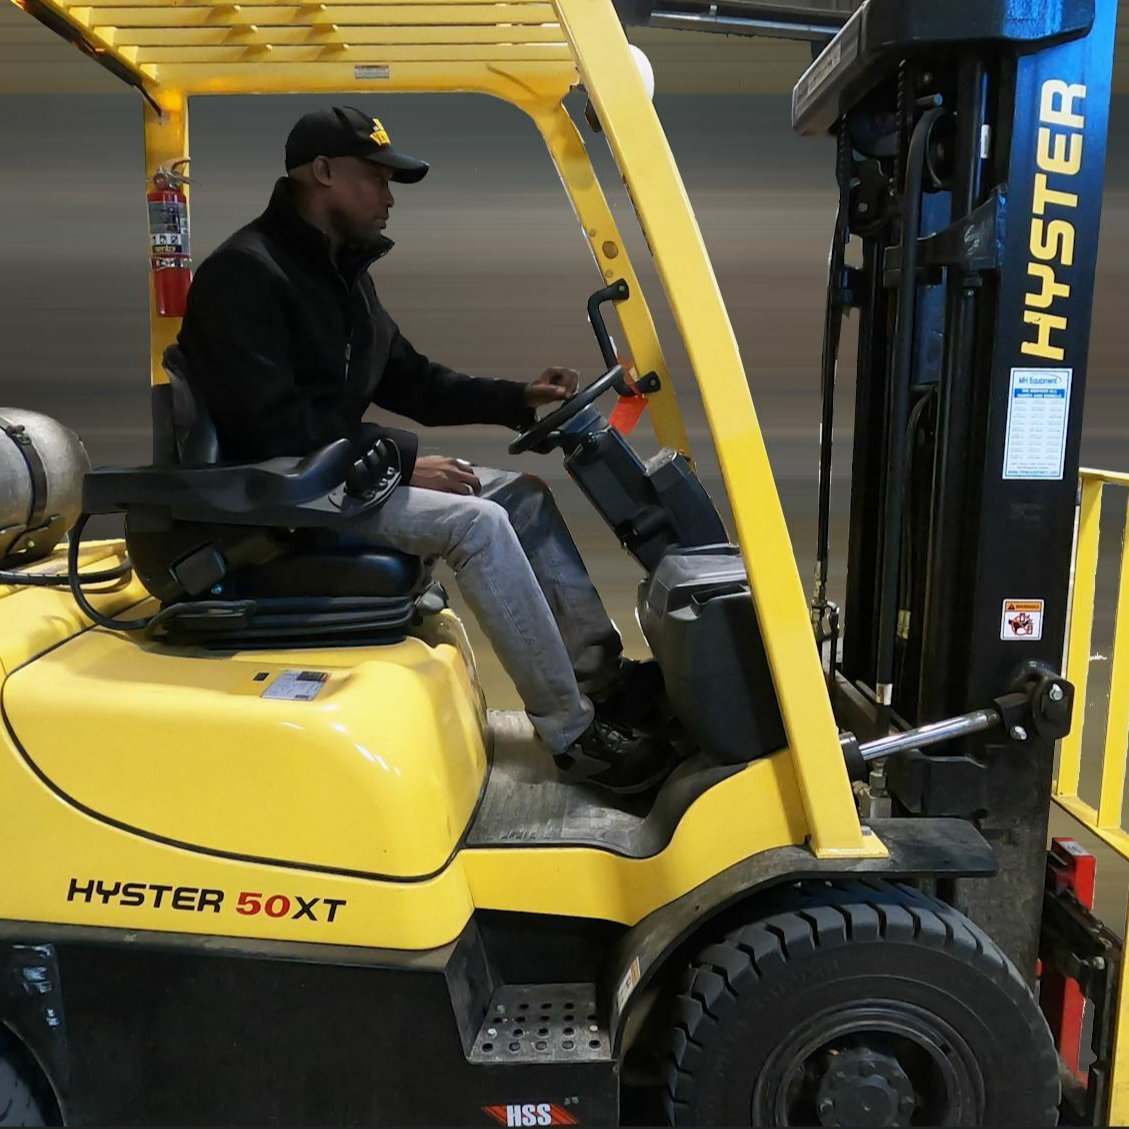 A Black man is operating a yellow fork lift.